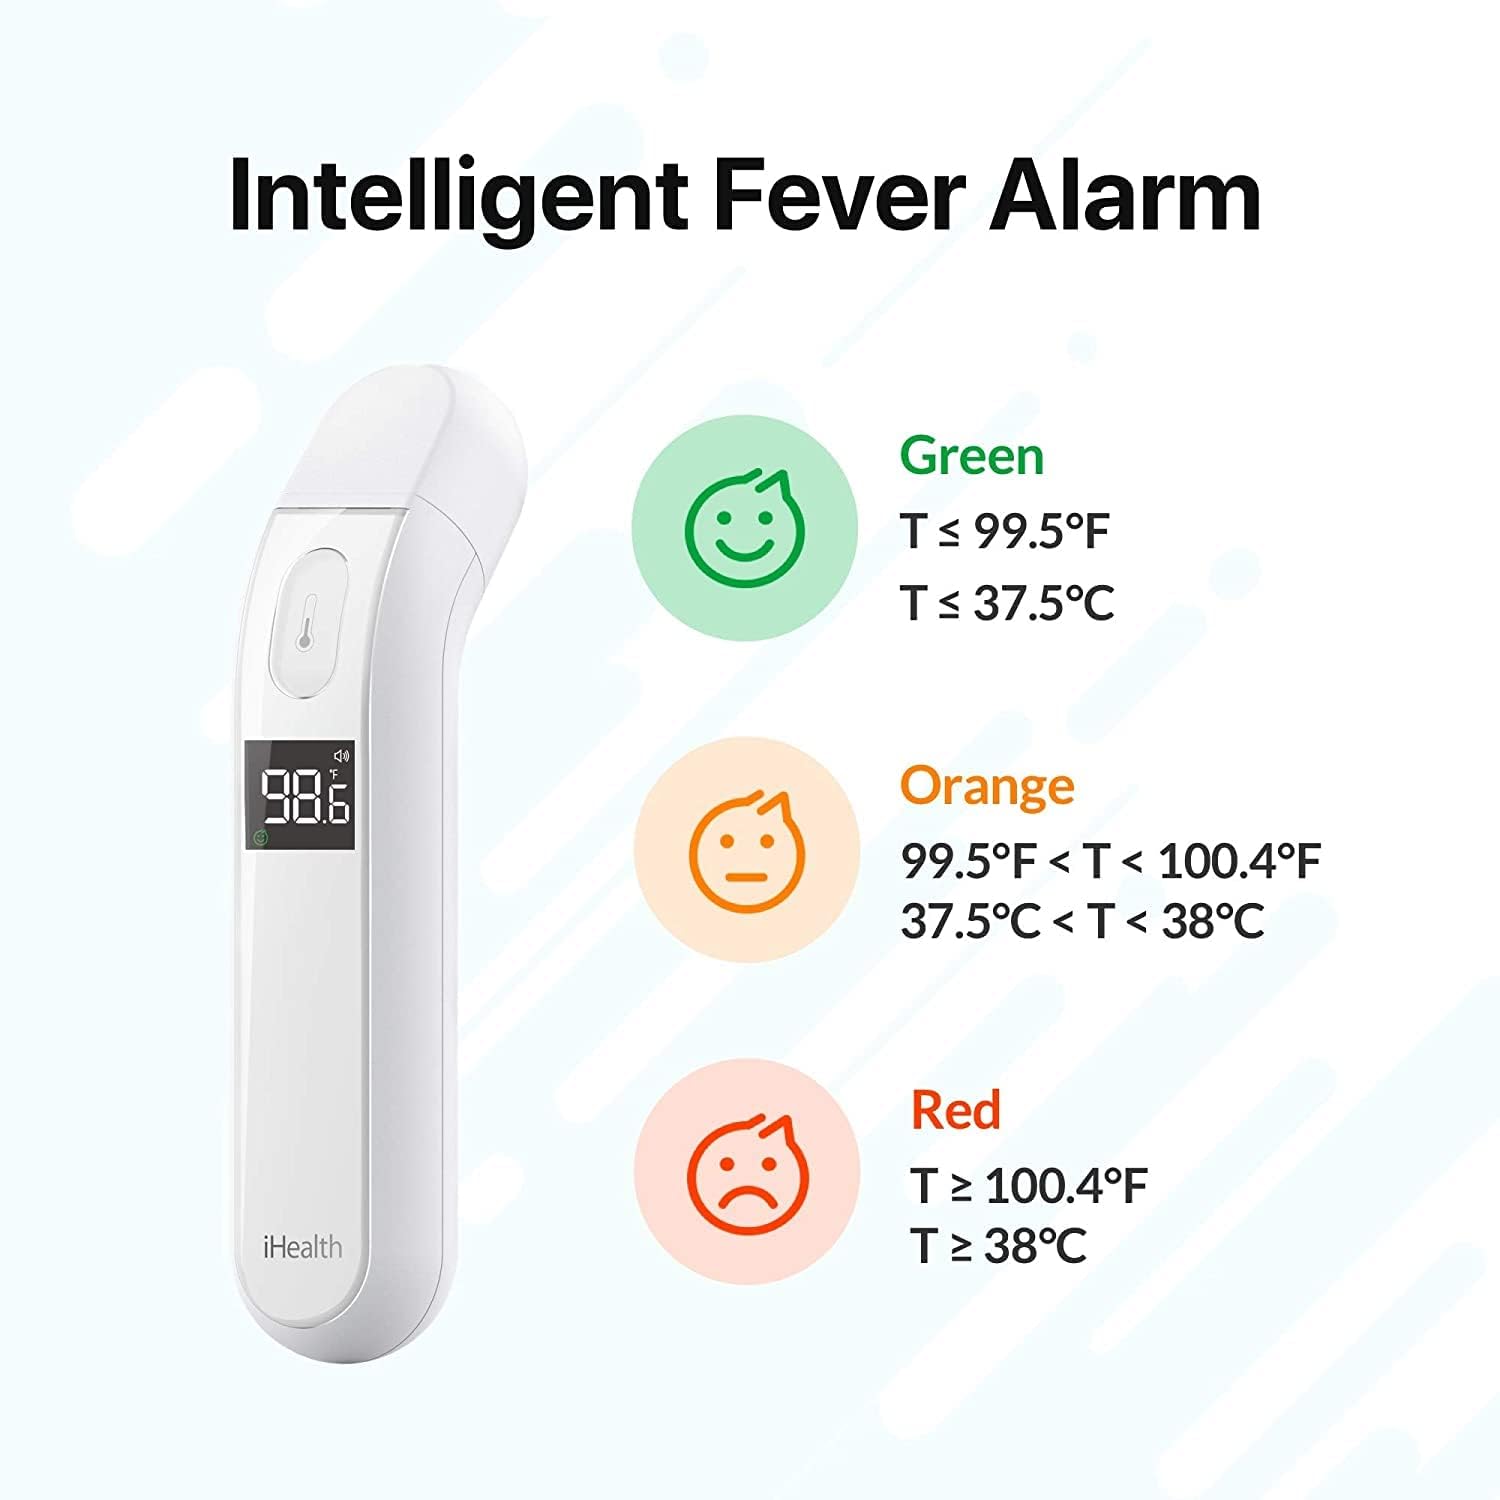 Thermometer for Adults by iHealth, Infrared Forehead Thermometer for Adults and Kids, Touchless Digital Baby Thermometer with Fever Indicator, Non Contact Thermometer (PT2L)